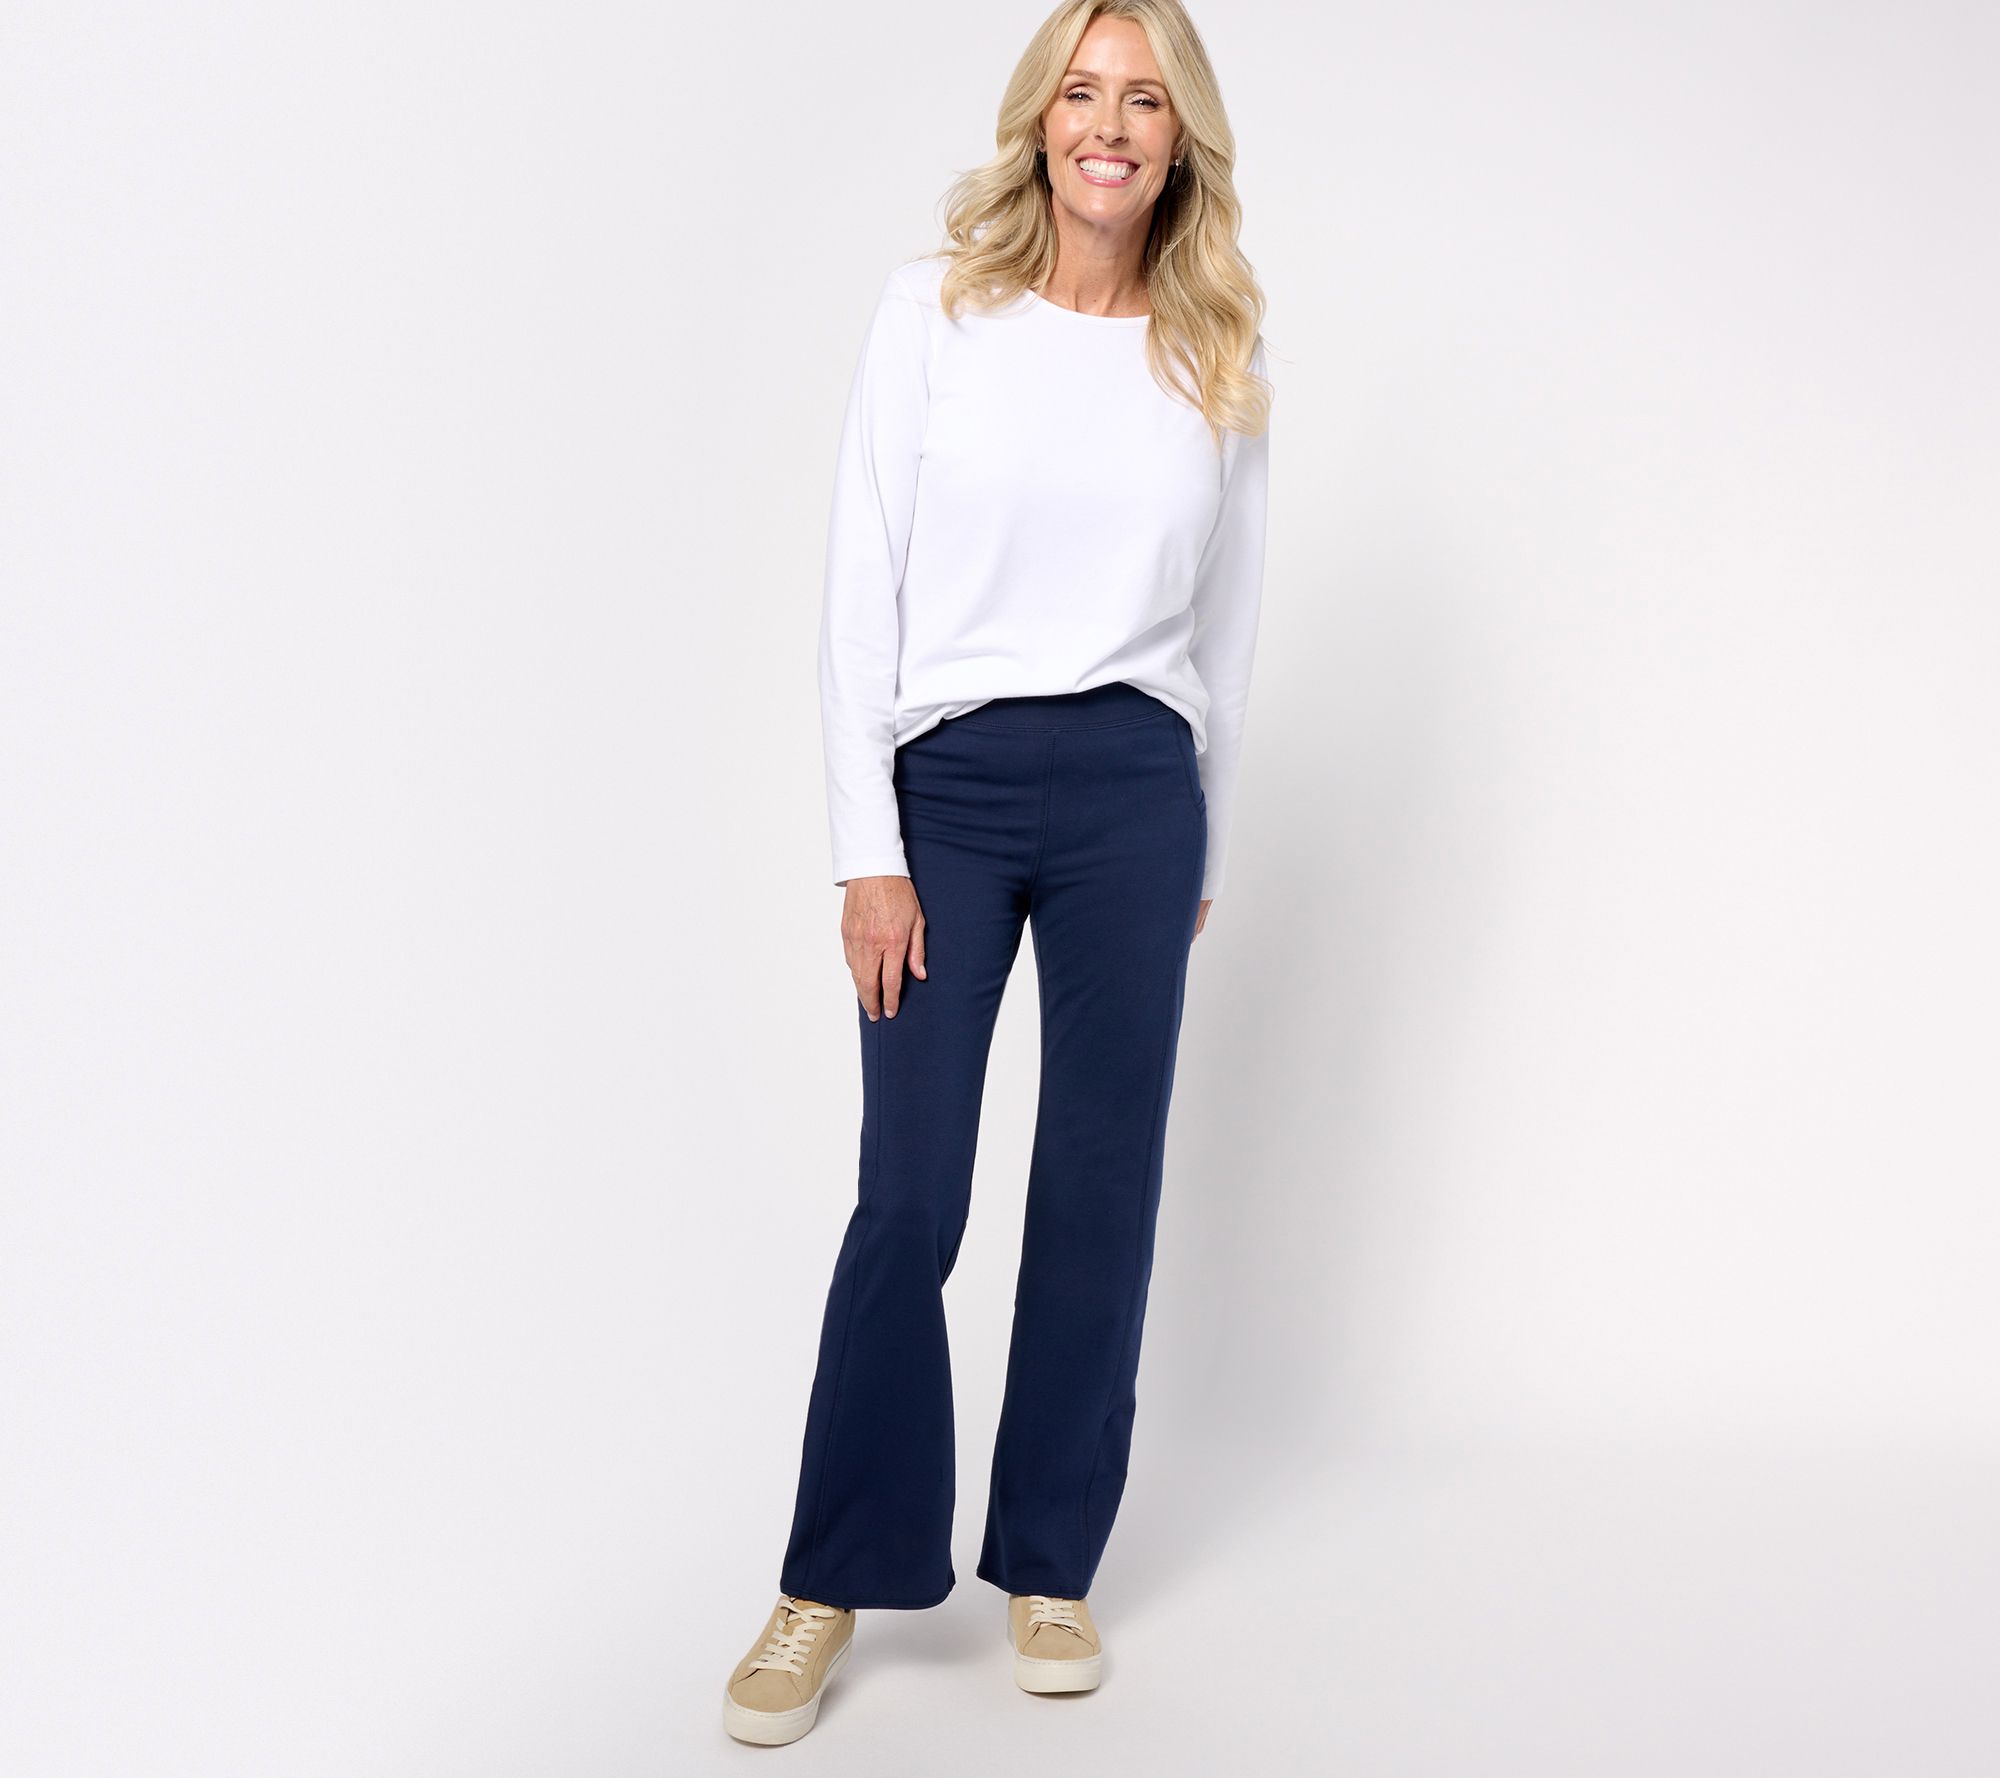 Denim & Co. Active Duo Stretch Tall Lightly Boot Pant w/ Pockets